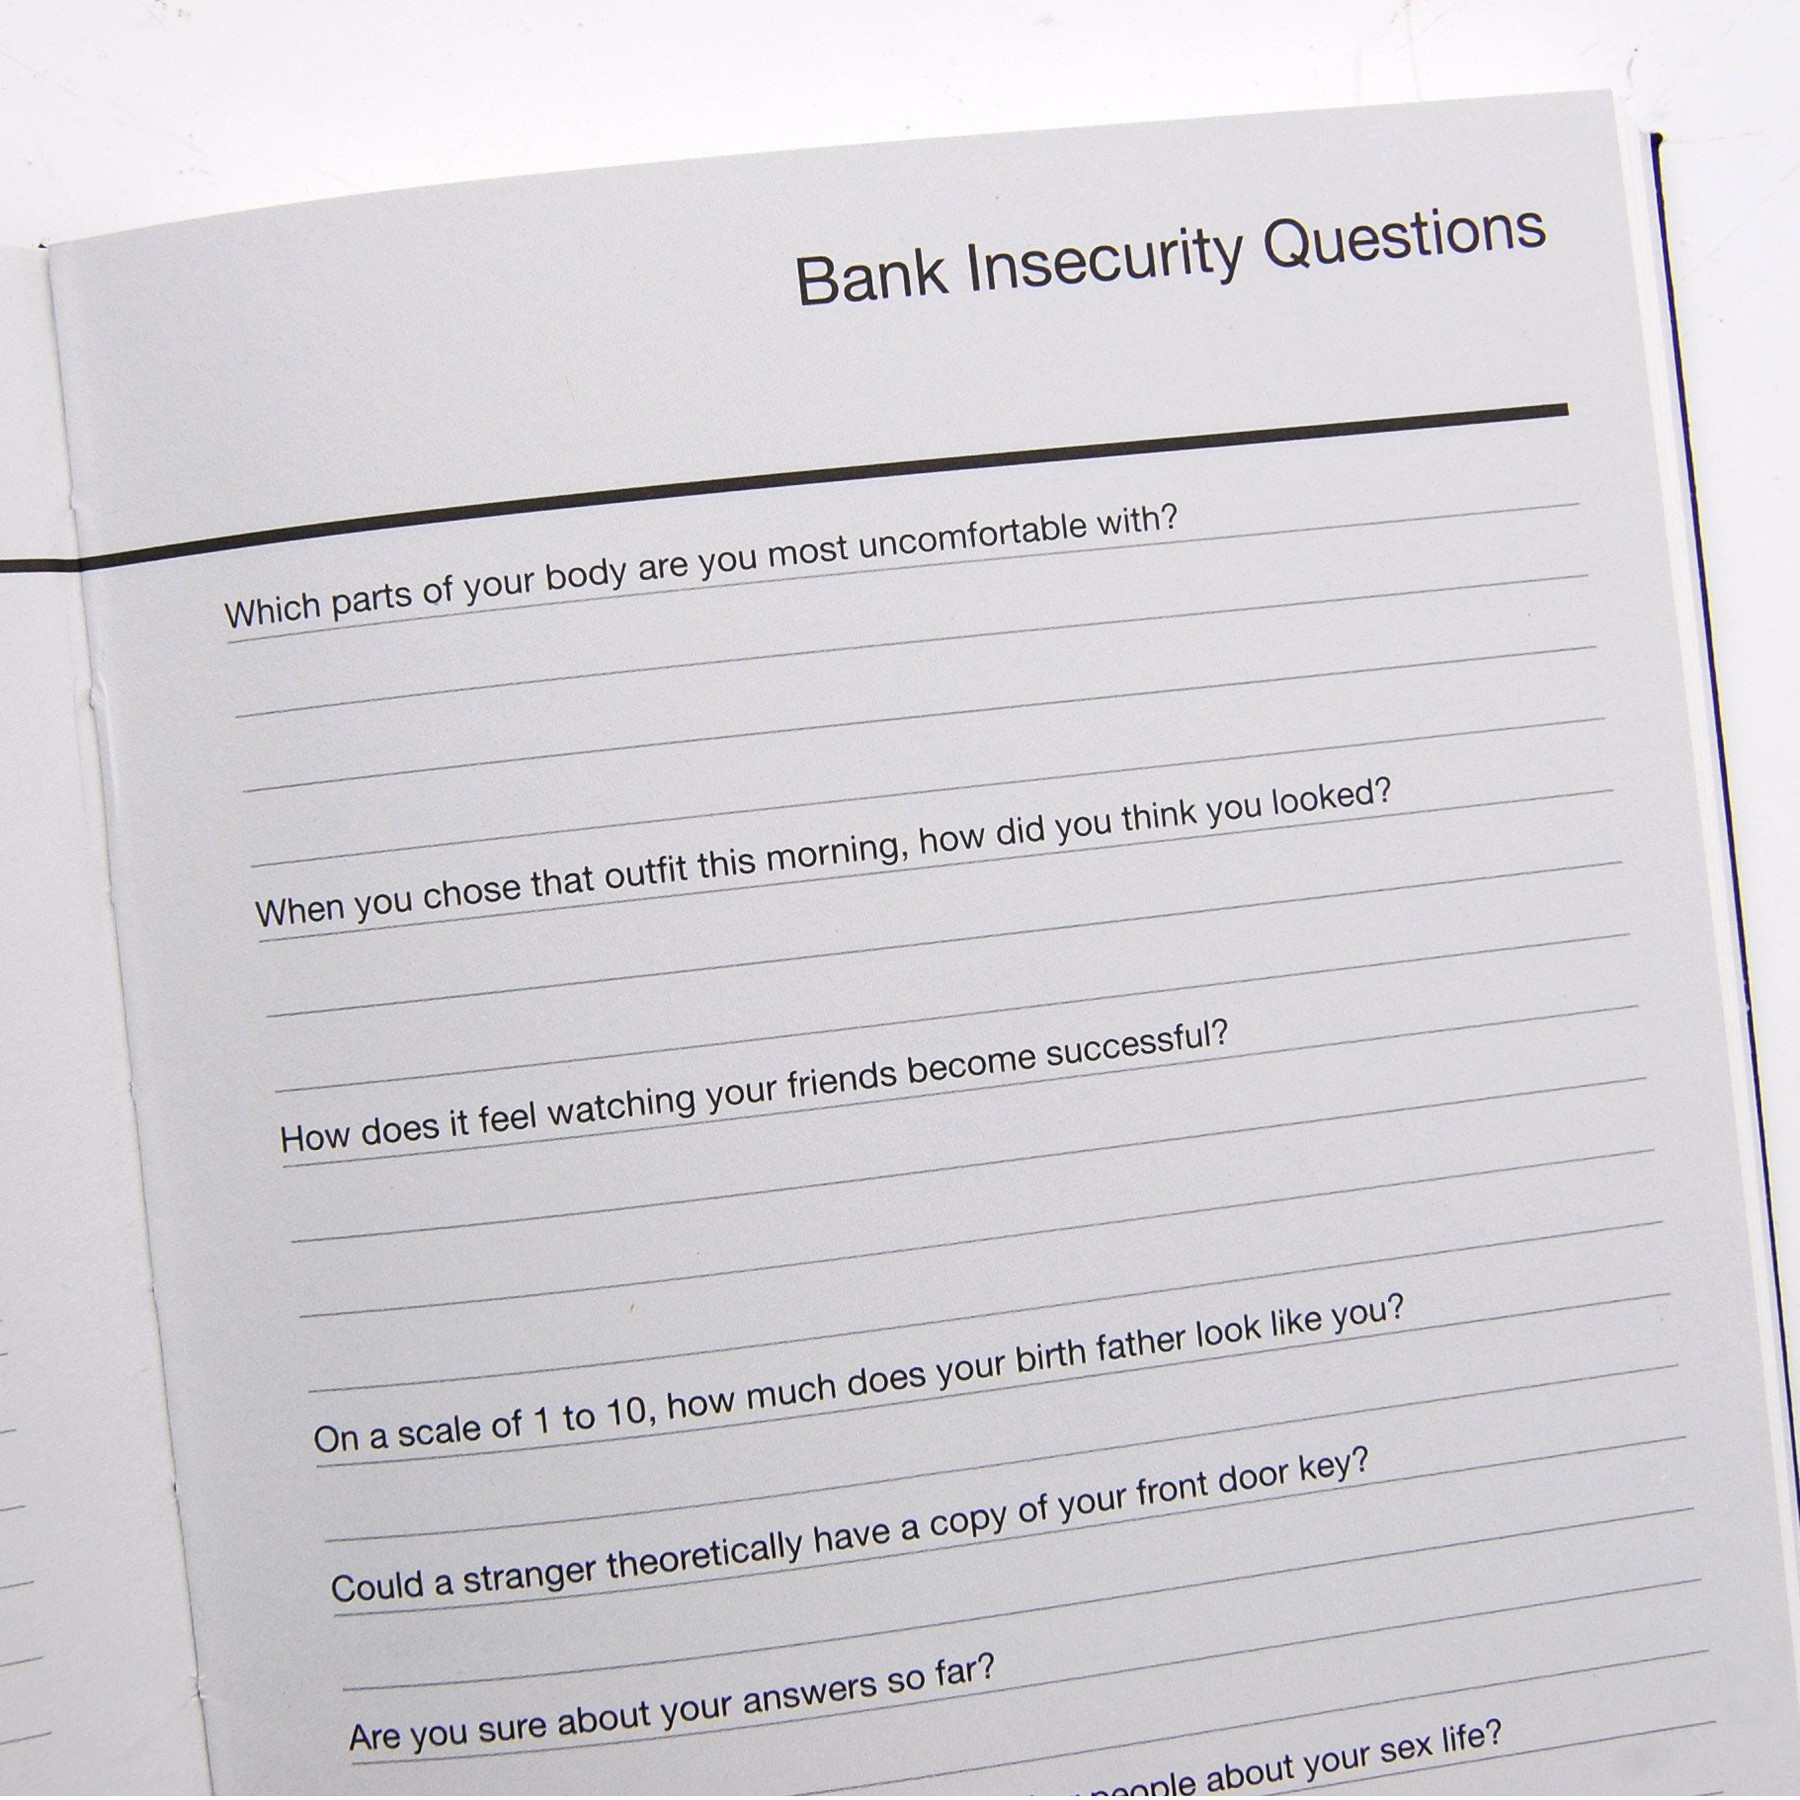 Bank Insecurity Questions from the "Perpetual Disappointments Diary" by Asbury & Asbury